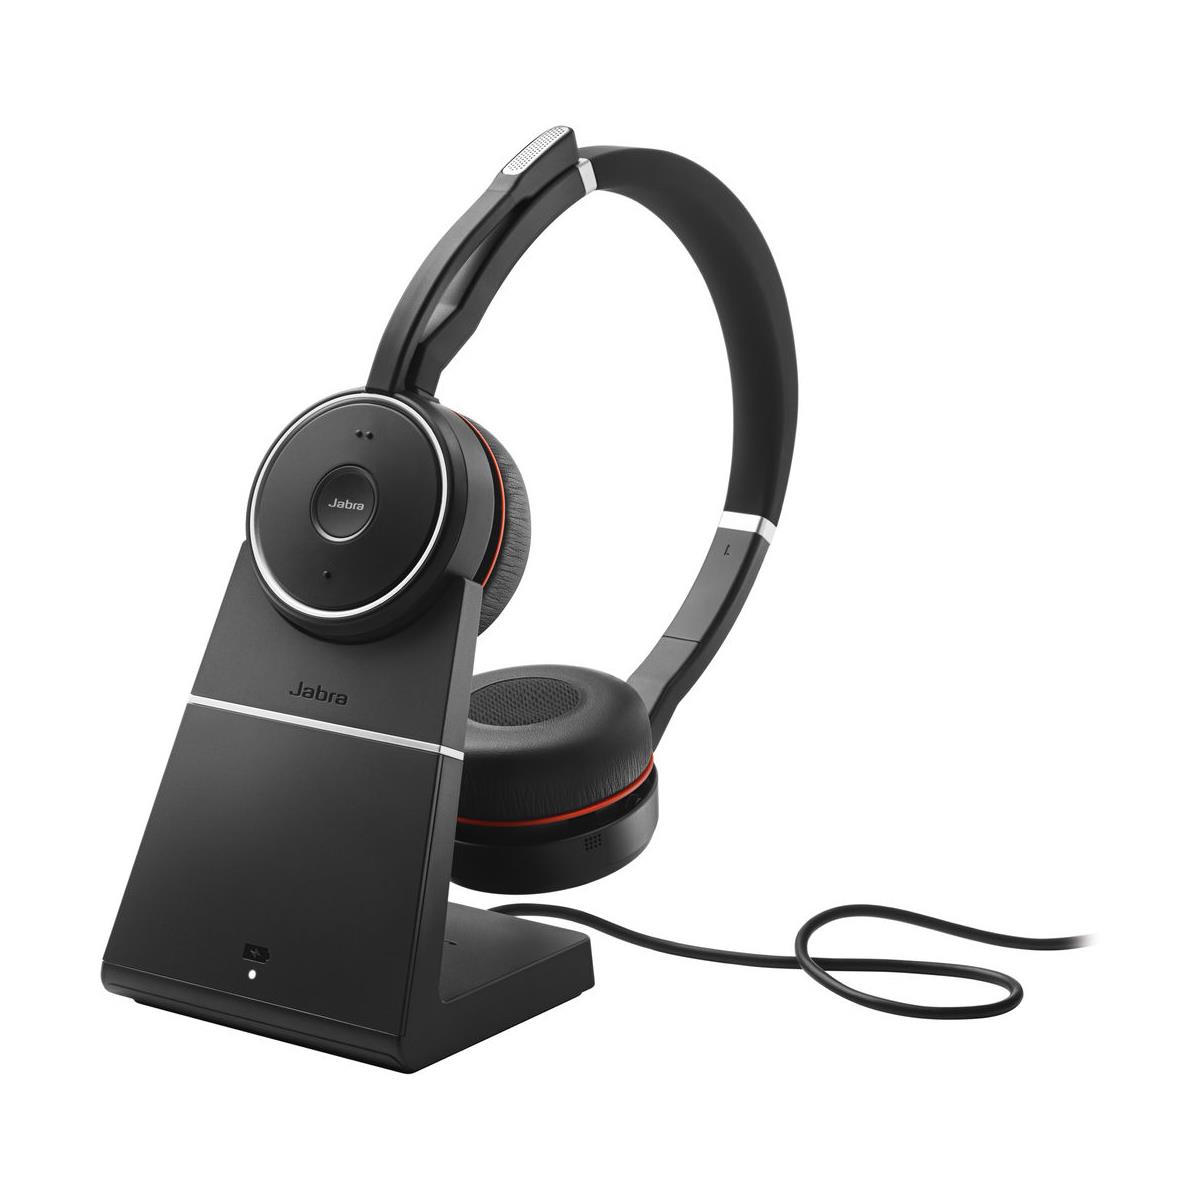 

Jabra Evolve 75 MS Stereo Bluetooth Headset with USB Adapter and Charging Stand